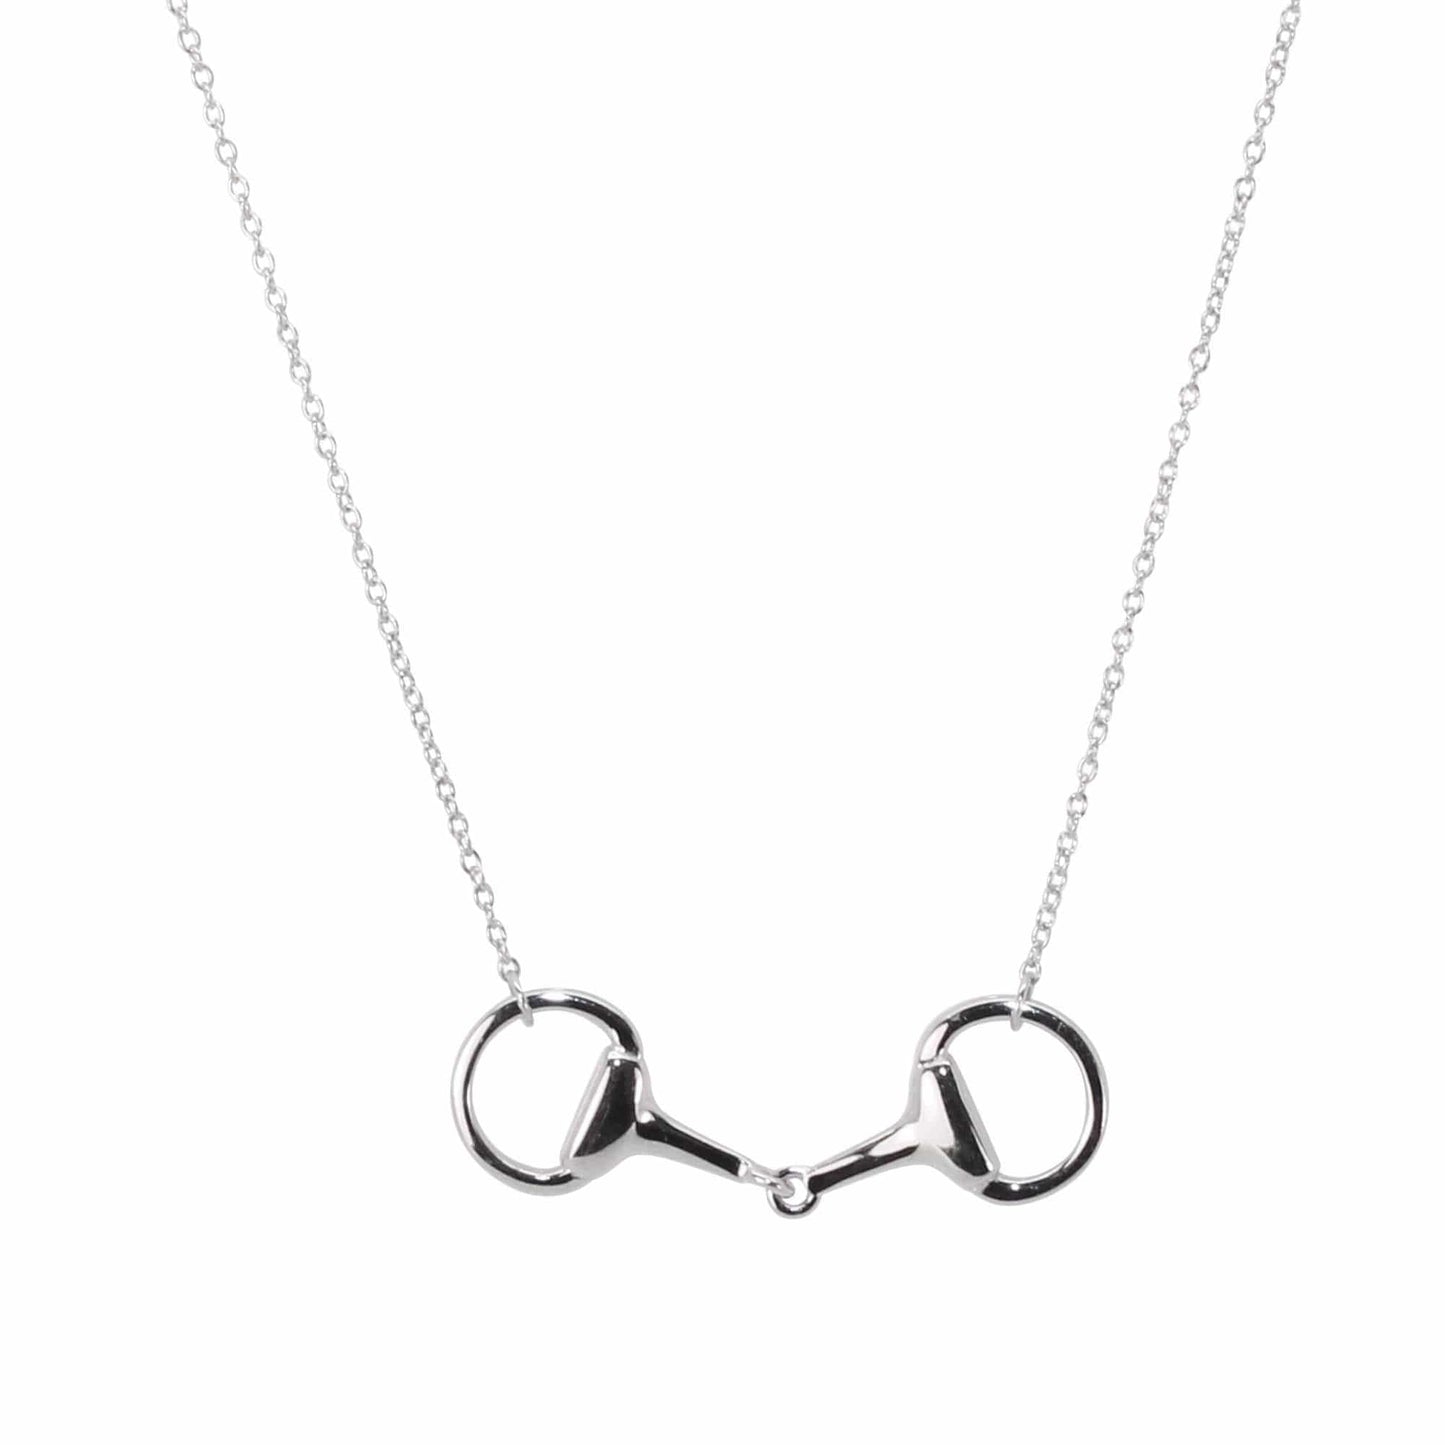 PEGASUS JEWELLERY Silver Snaffle Necklace and Bracelet Deal